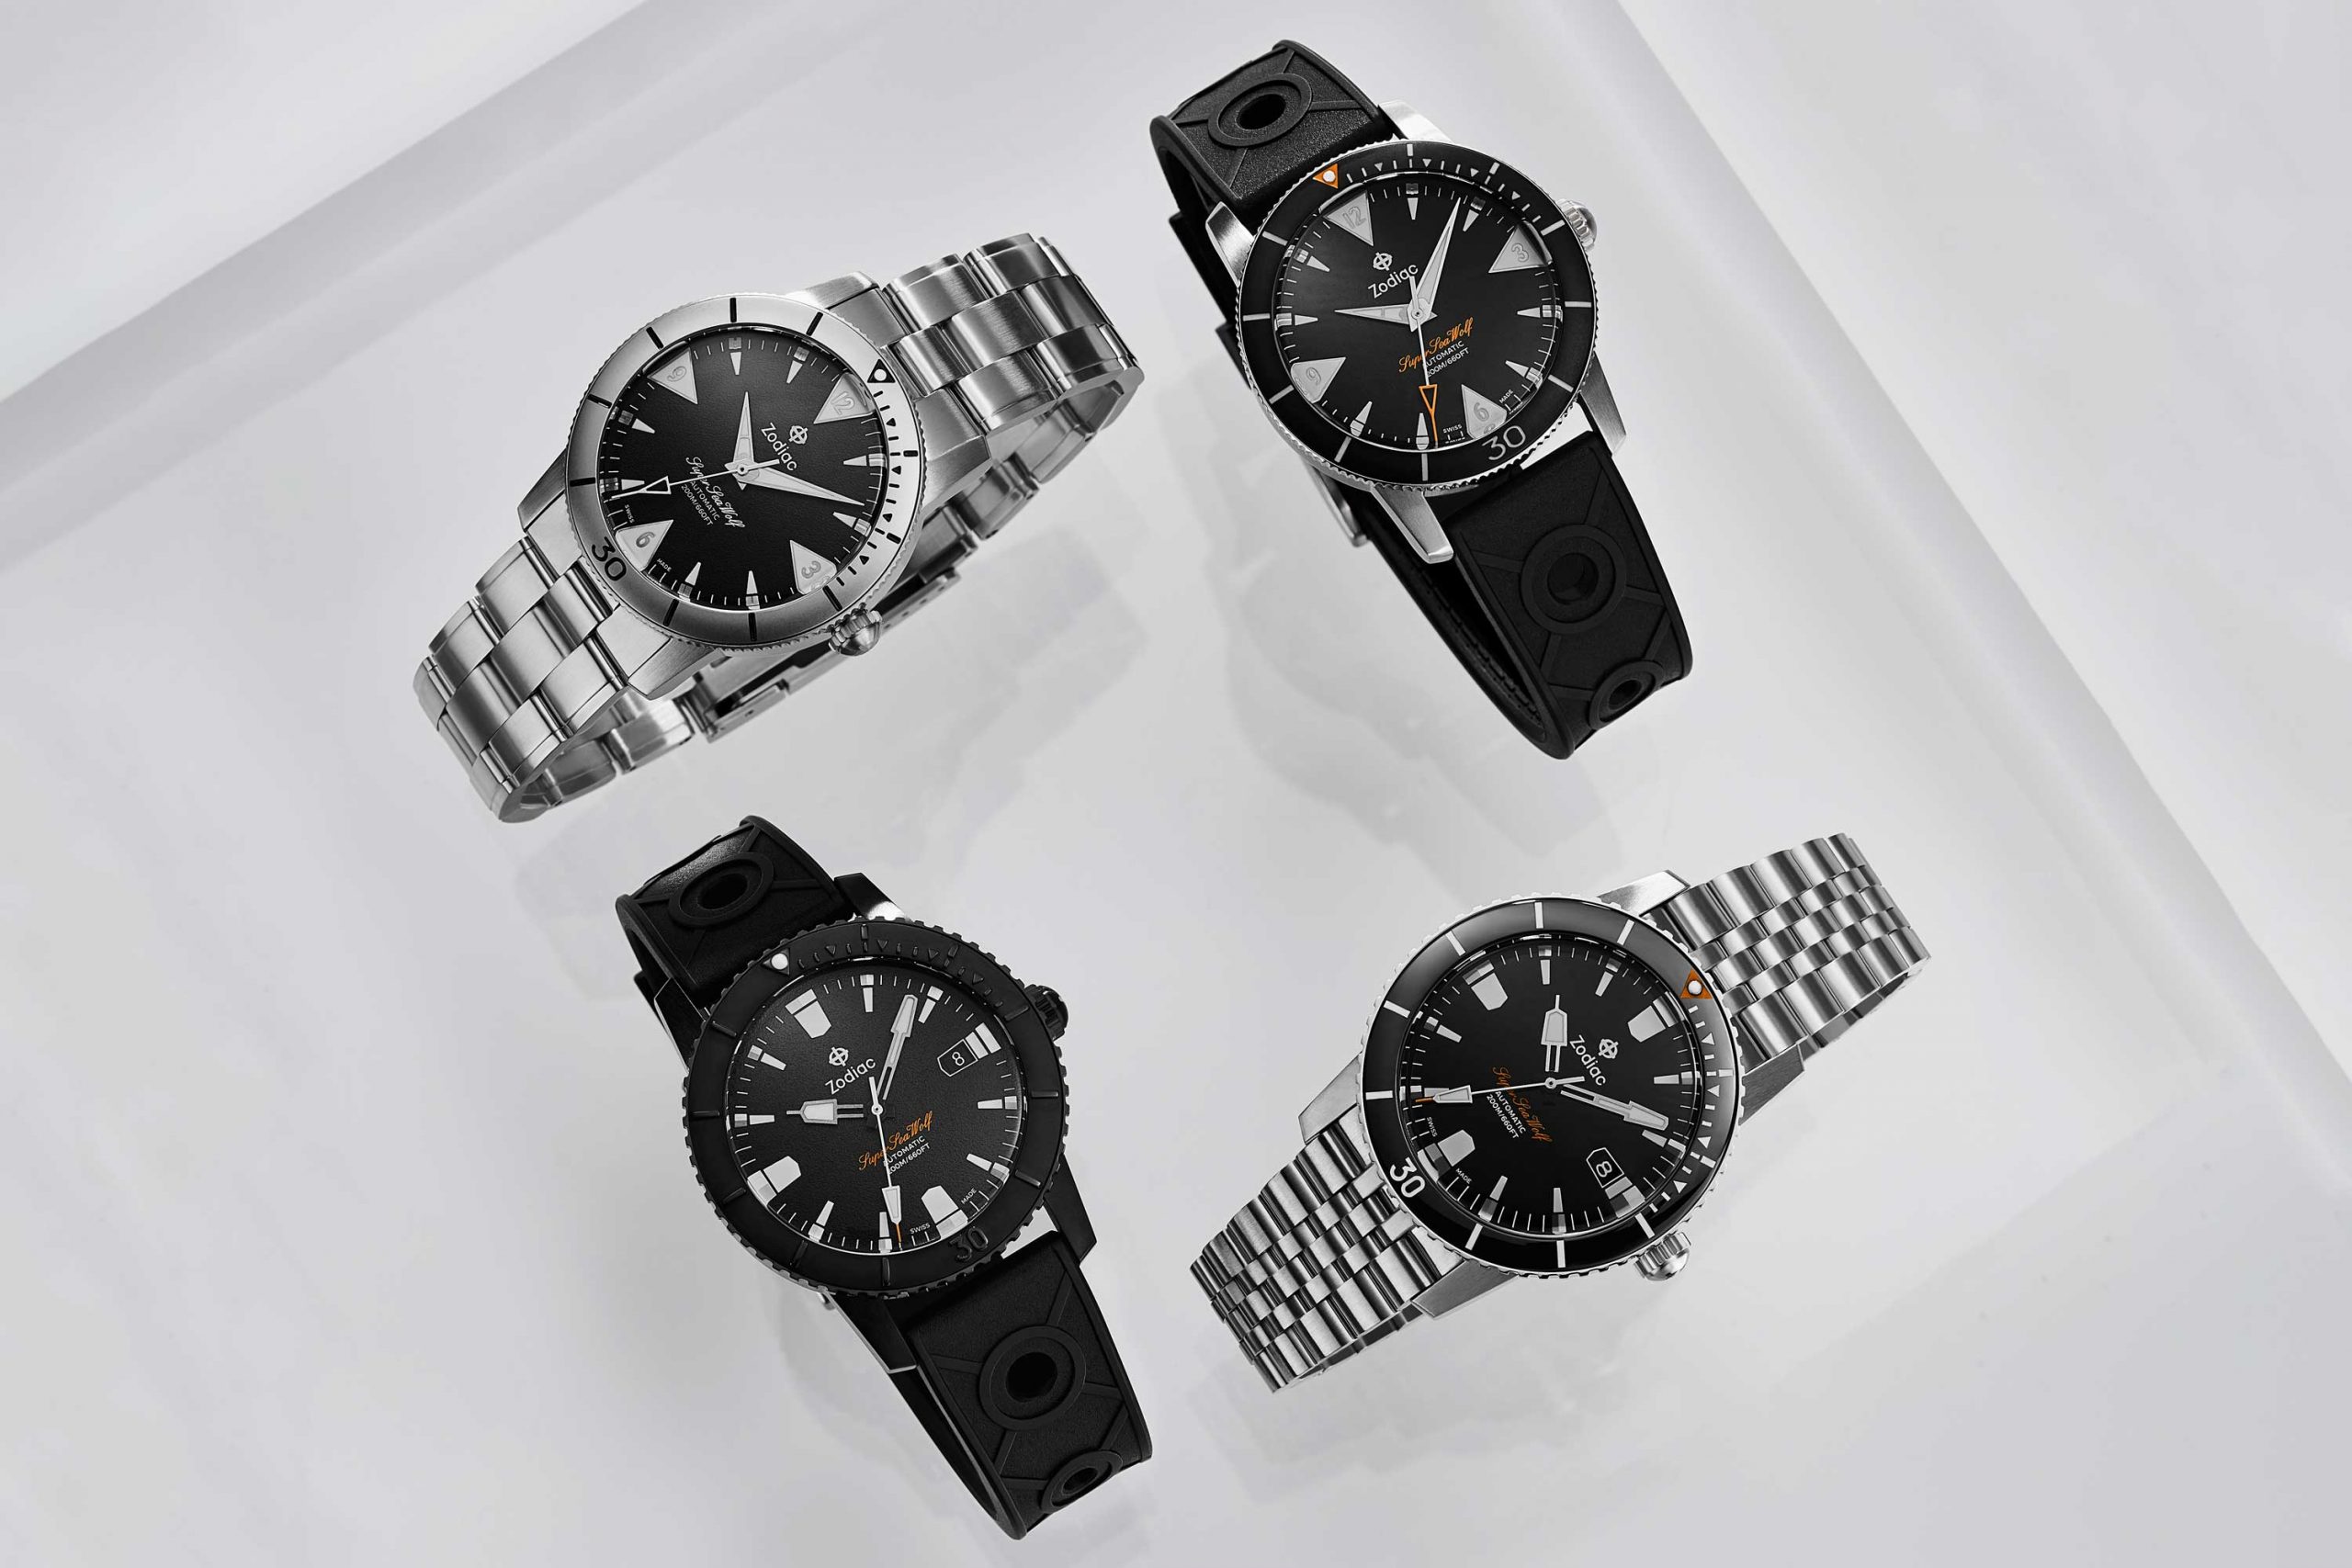 Introducing New Zodiac Super Sea Wolf Collection